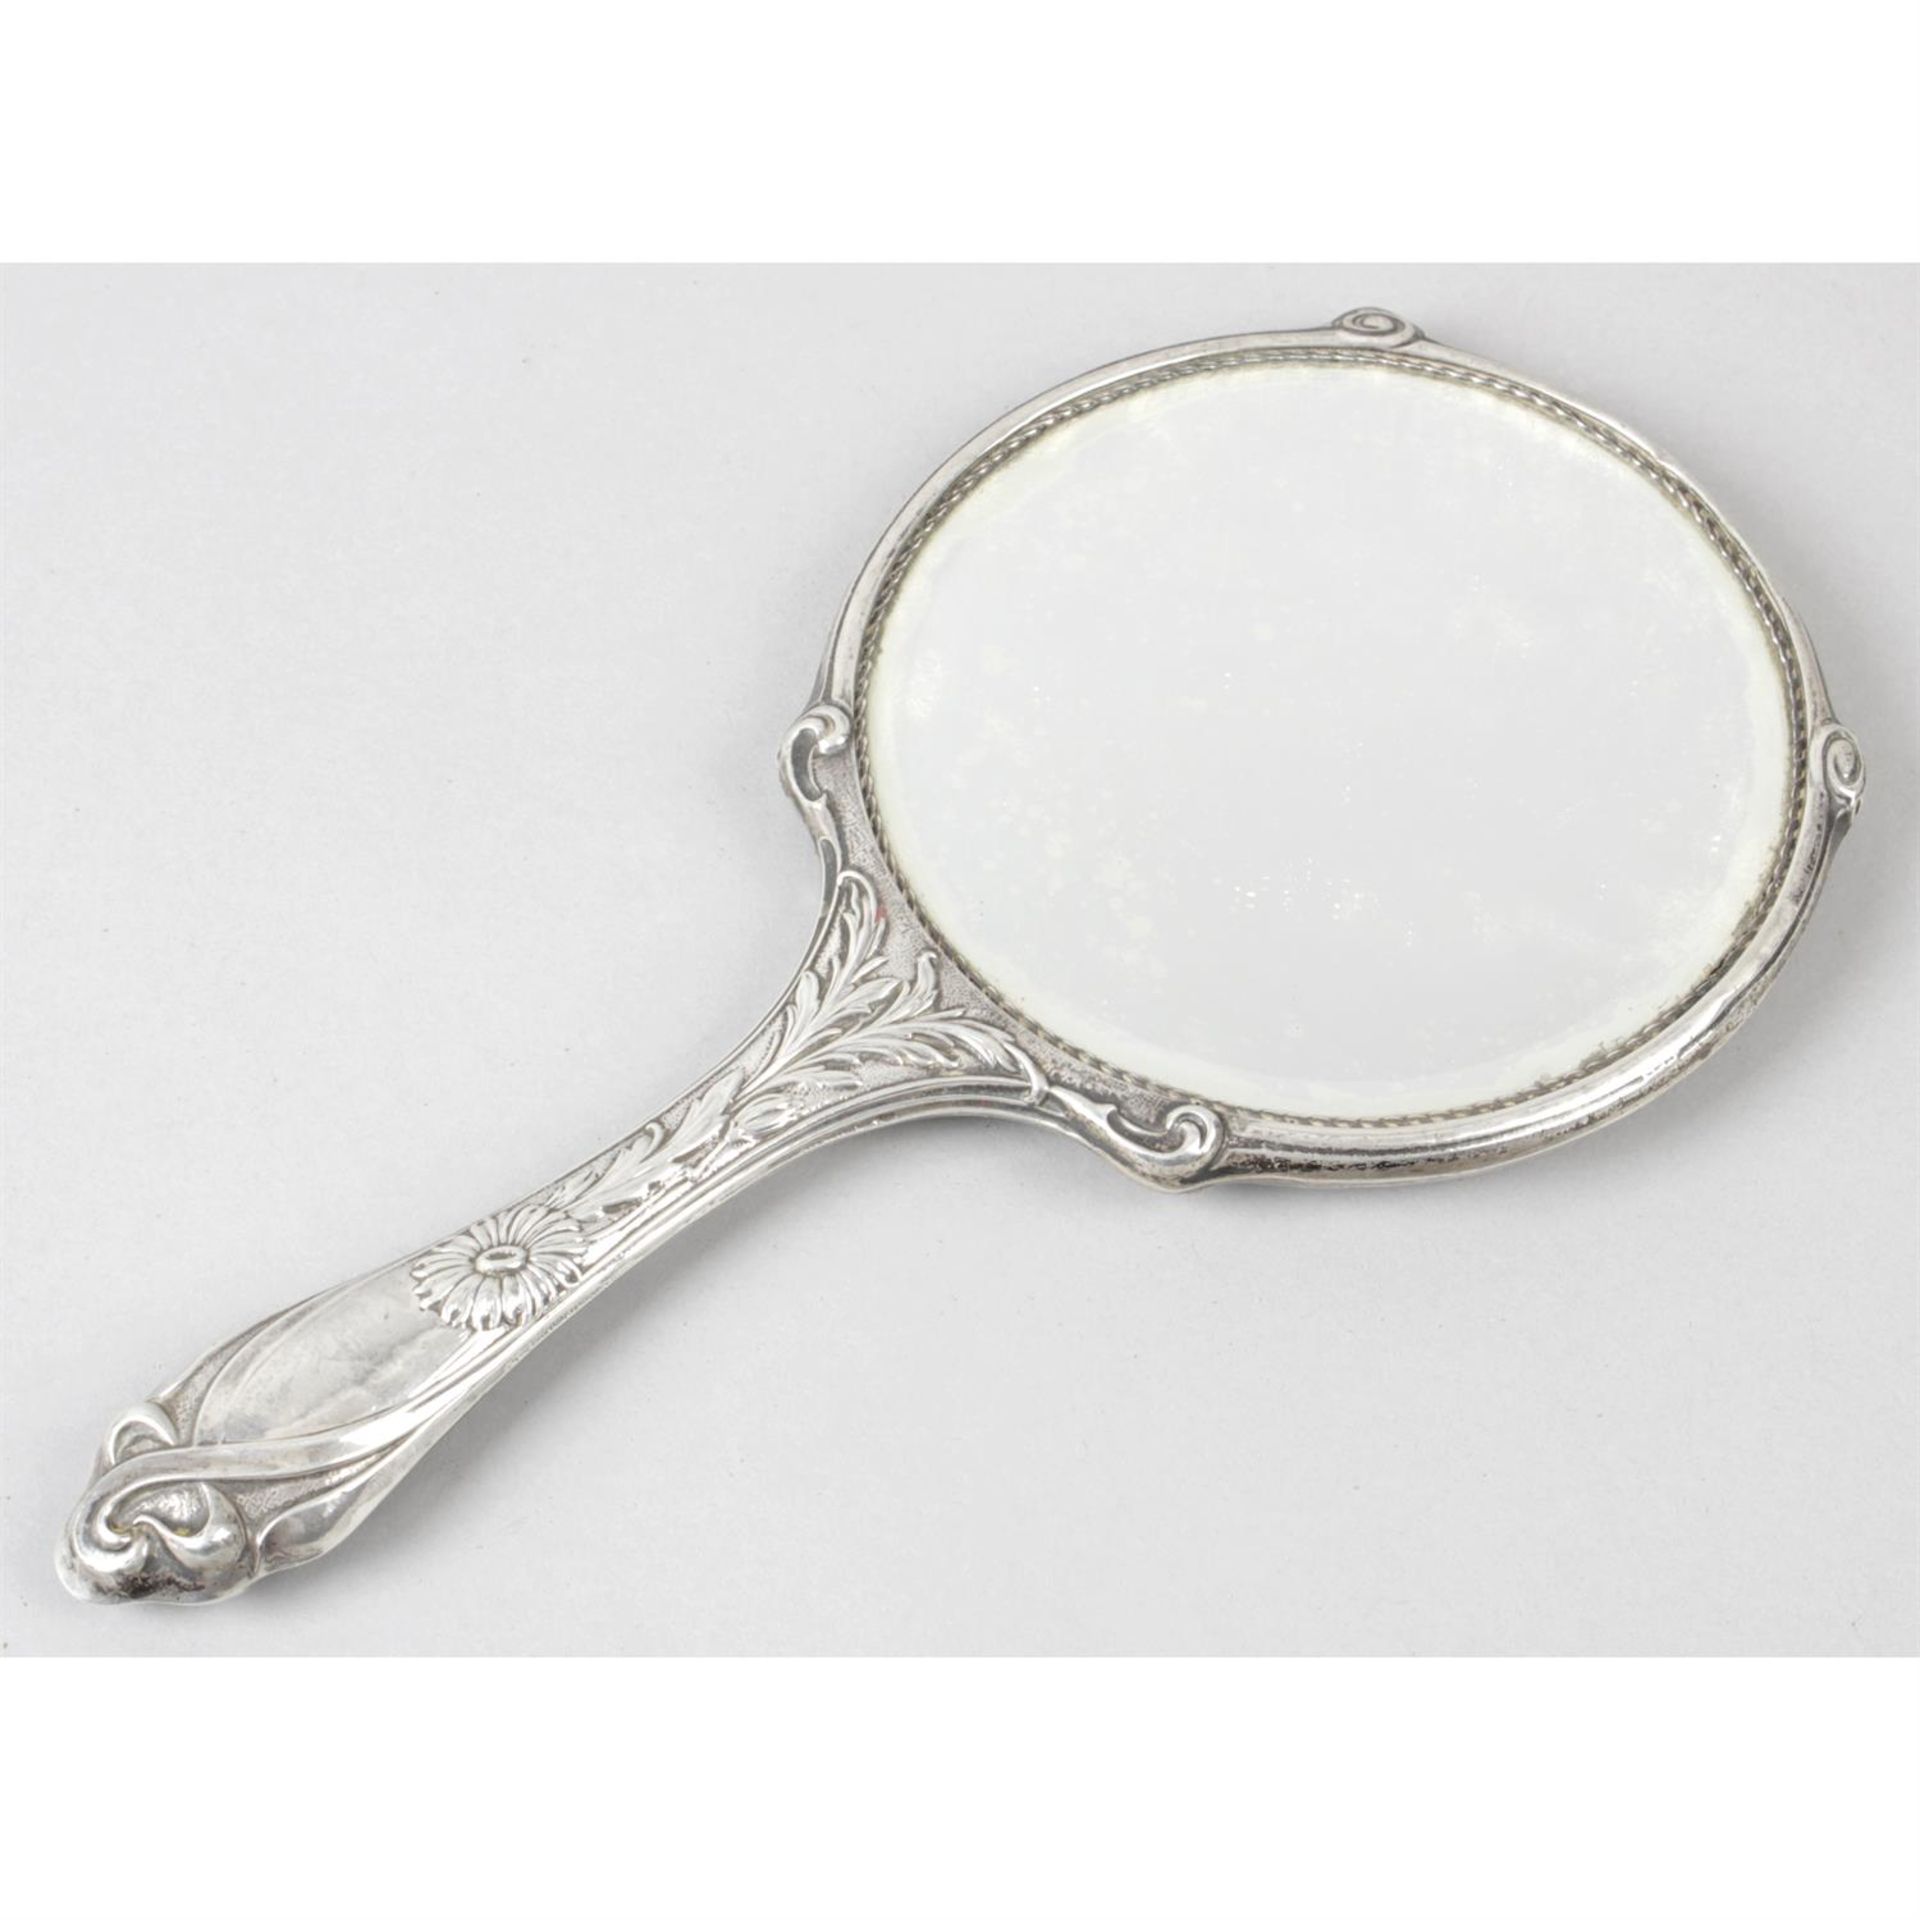 An Edwardian silver mounted Art Nouveau style hand-held mirror. - Image 2 of 3